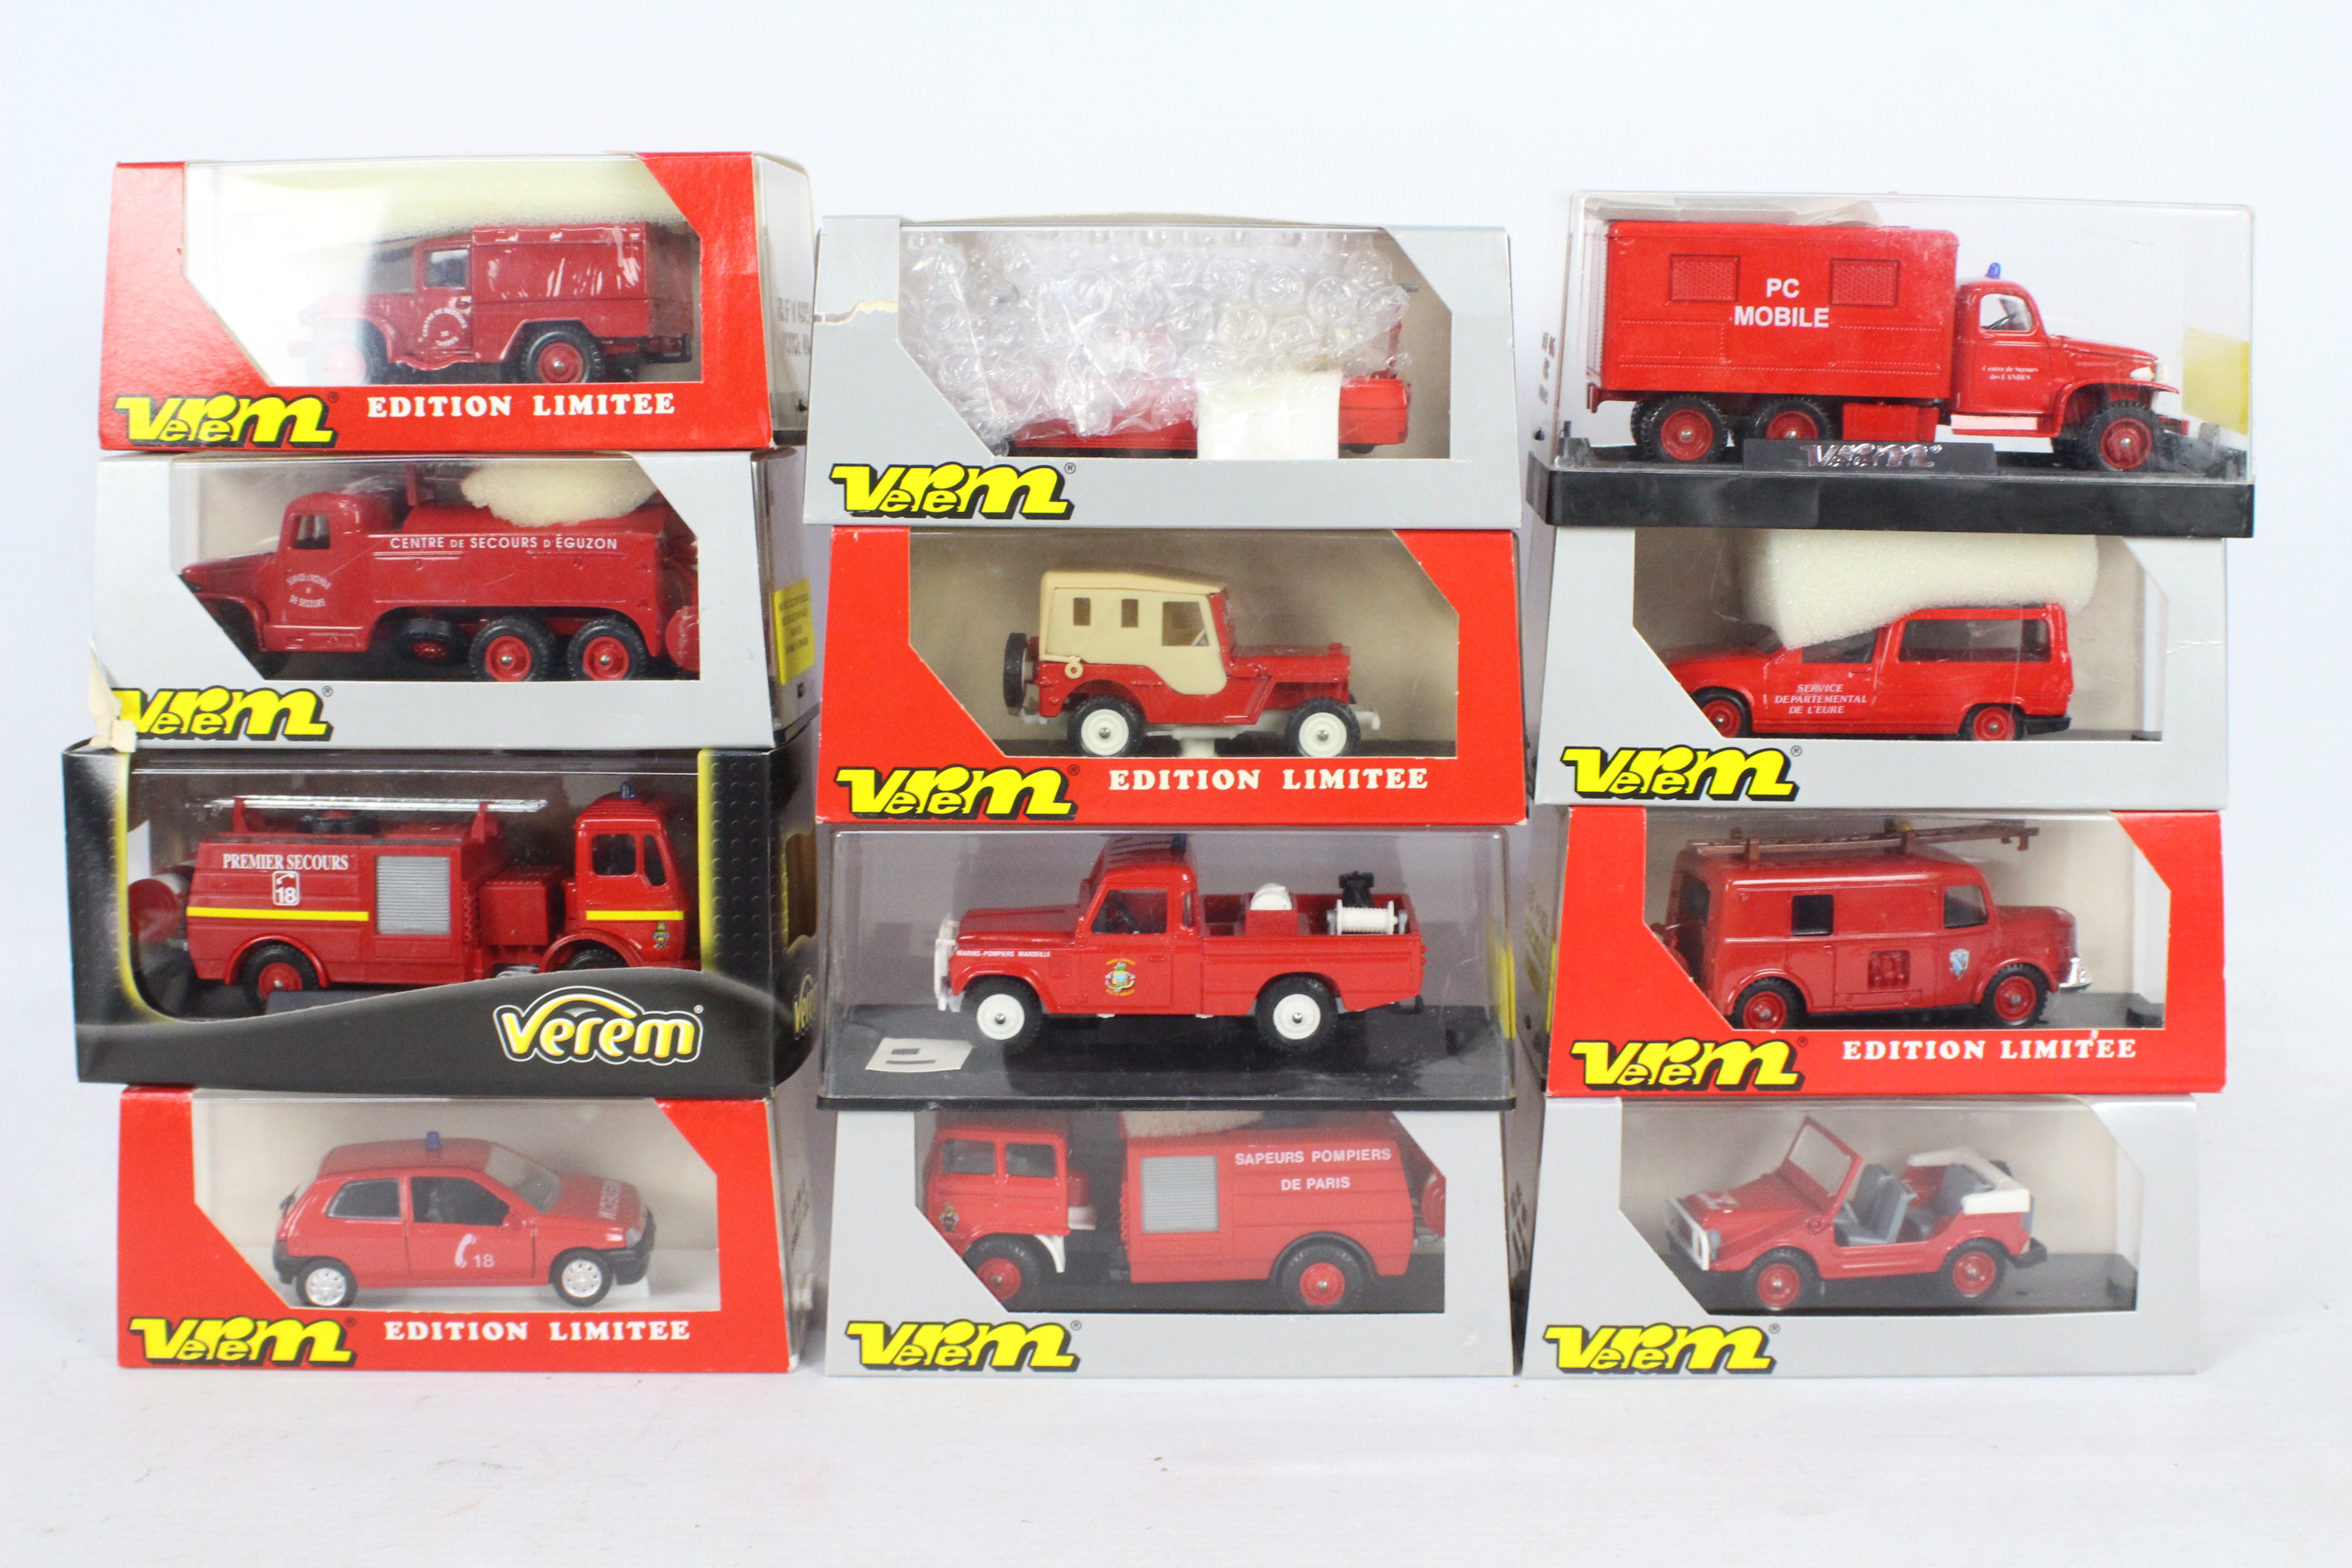 Verem / Solido - A boxed collection of 12 diecast Fire appliances from Verem.